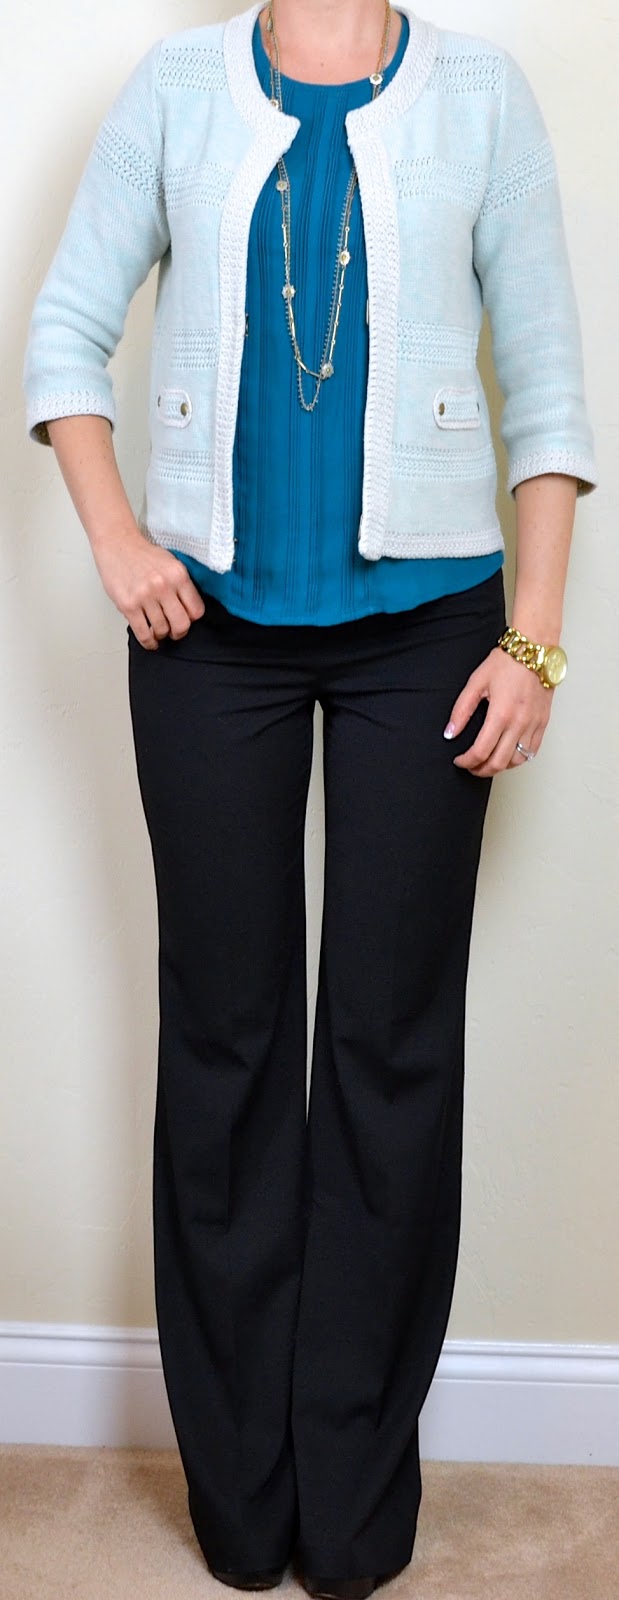 outfit post: mint cardigan/jacket, teal pleated blouse, black 'editor ...